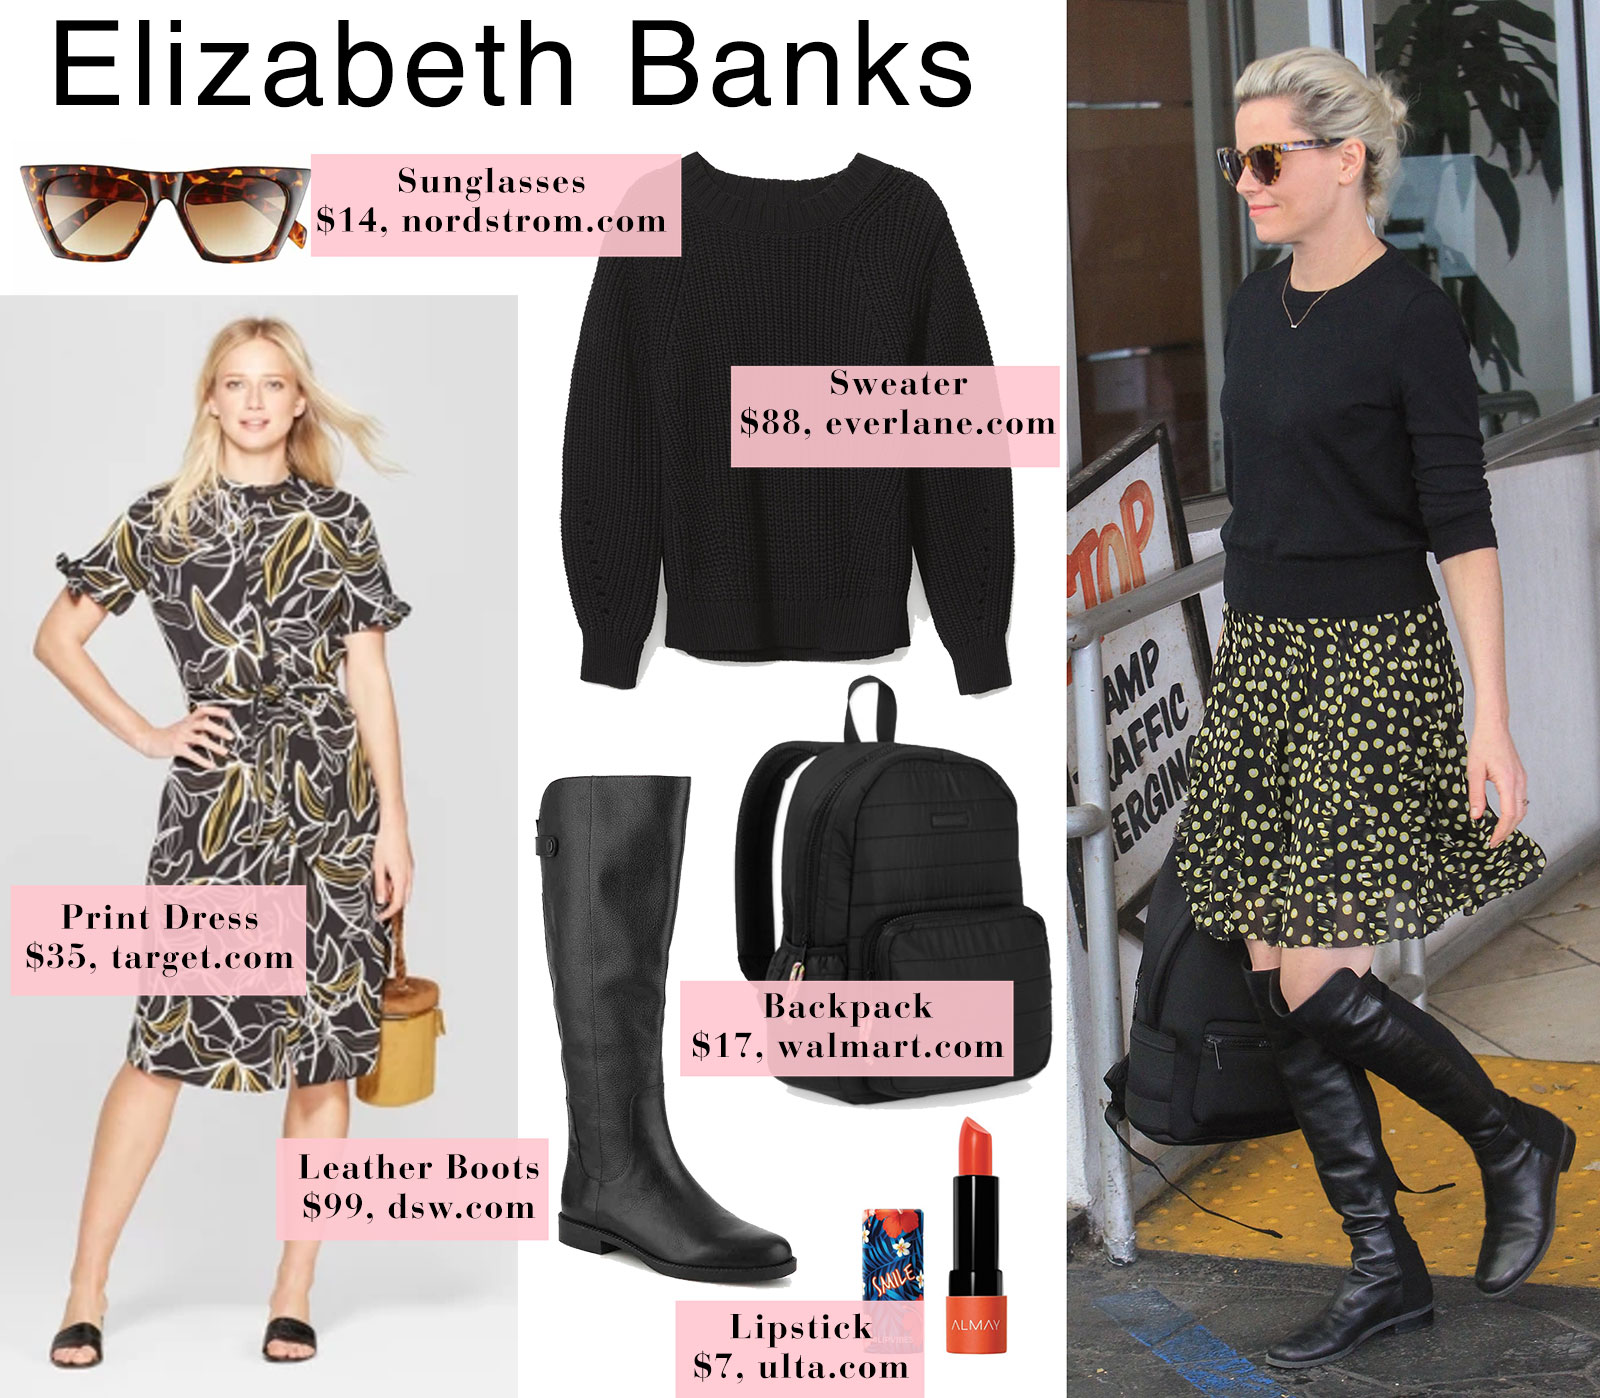 Elizabeth Banks outfit idea - layer a sweater over a spring dress